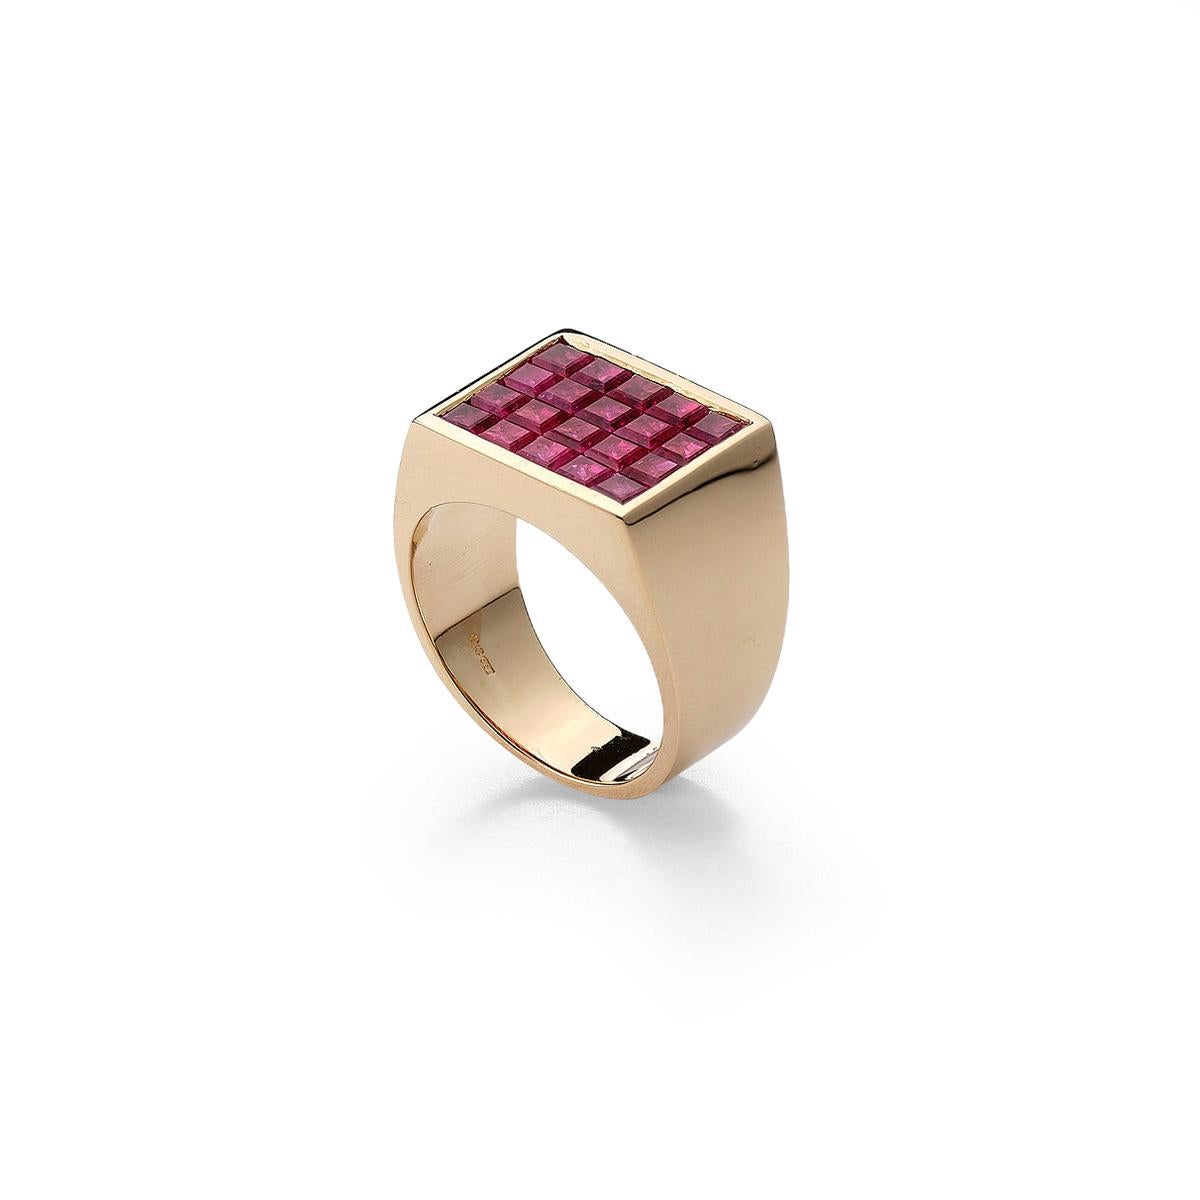 Ring in 18 karat yellow gold set with 20 square cut rubies weigh 4.79 carats total Size 54